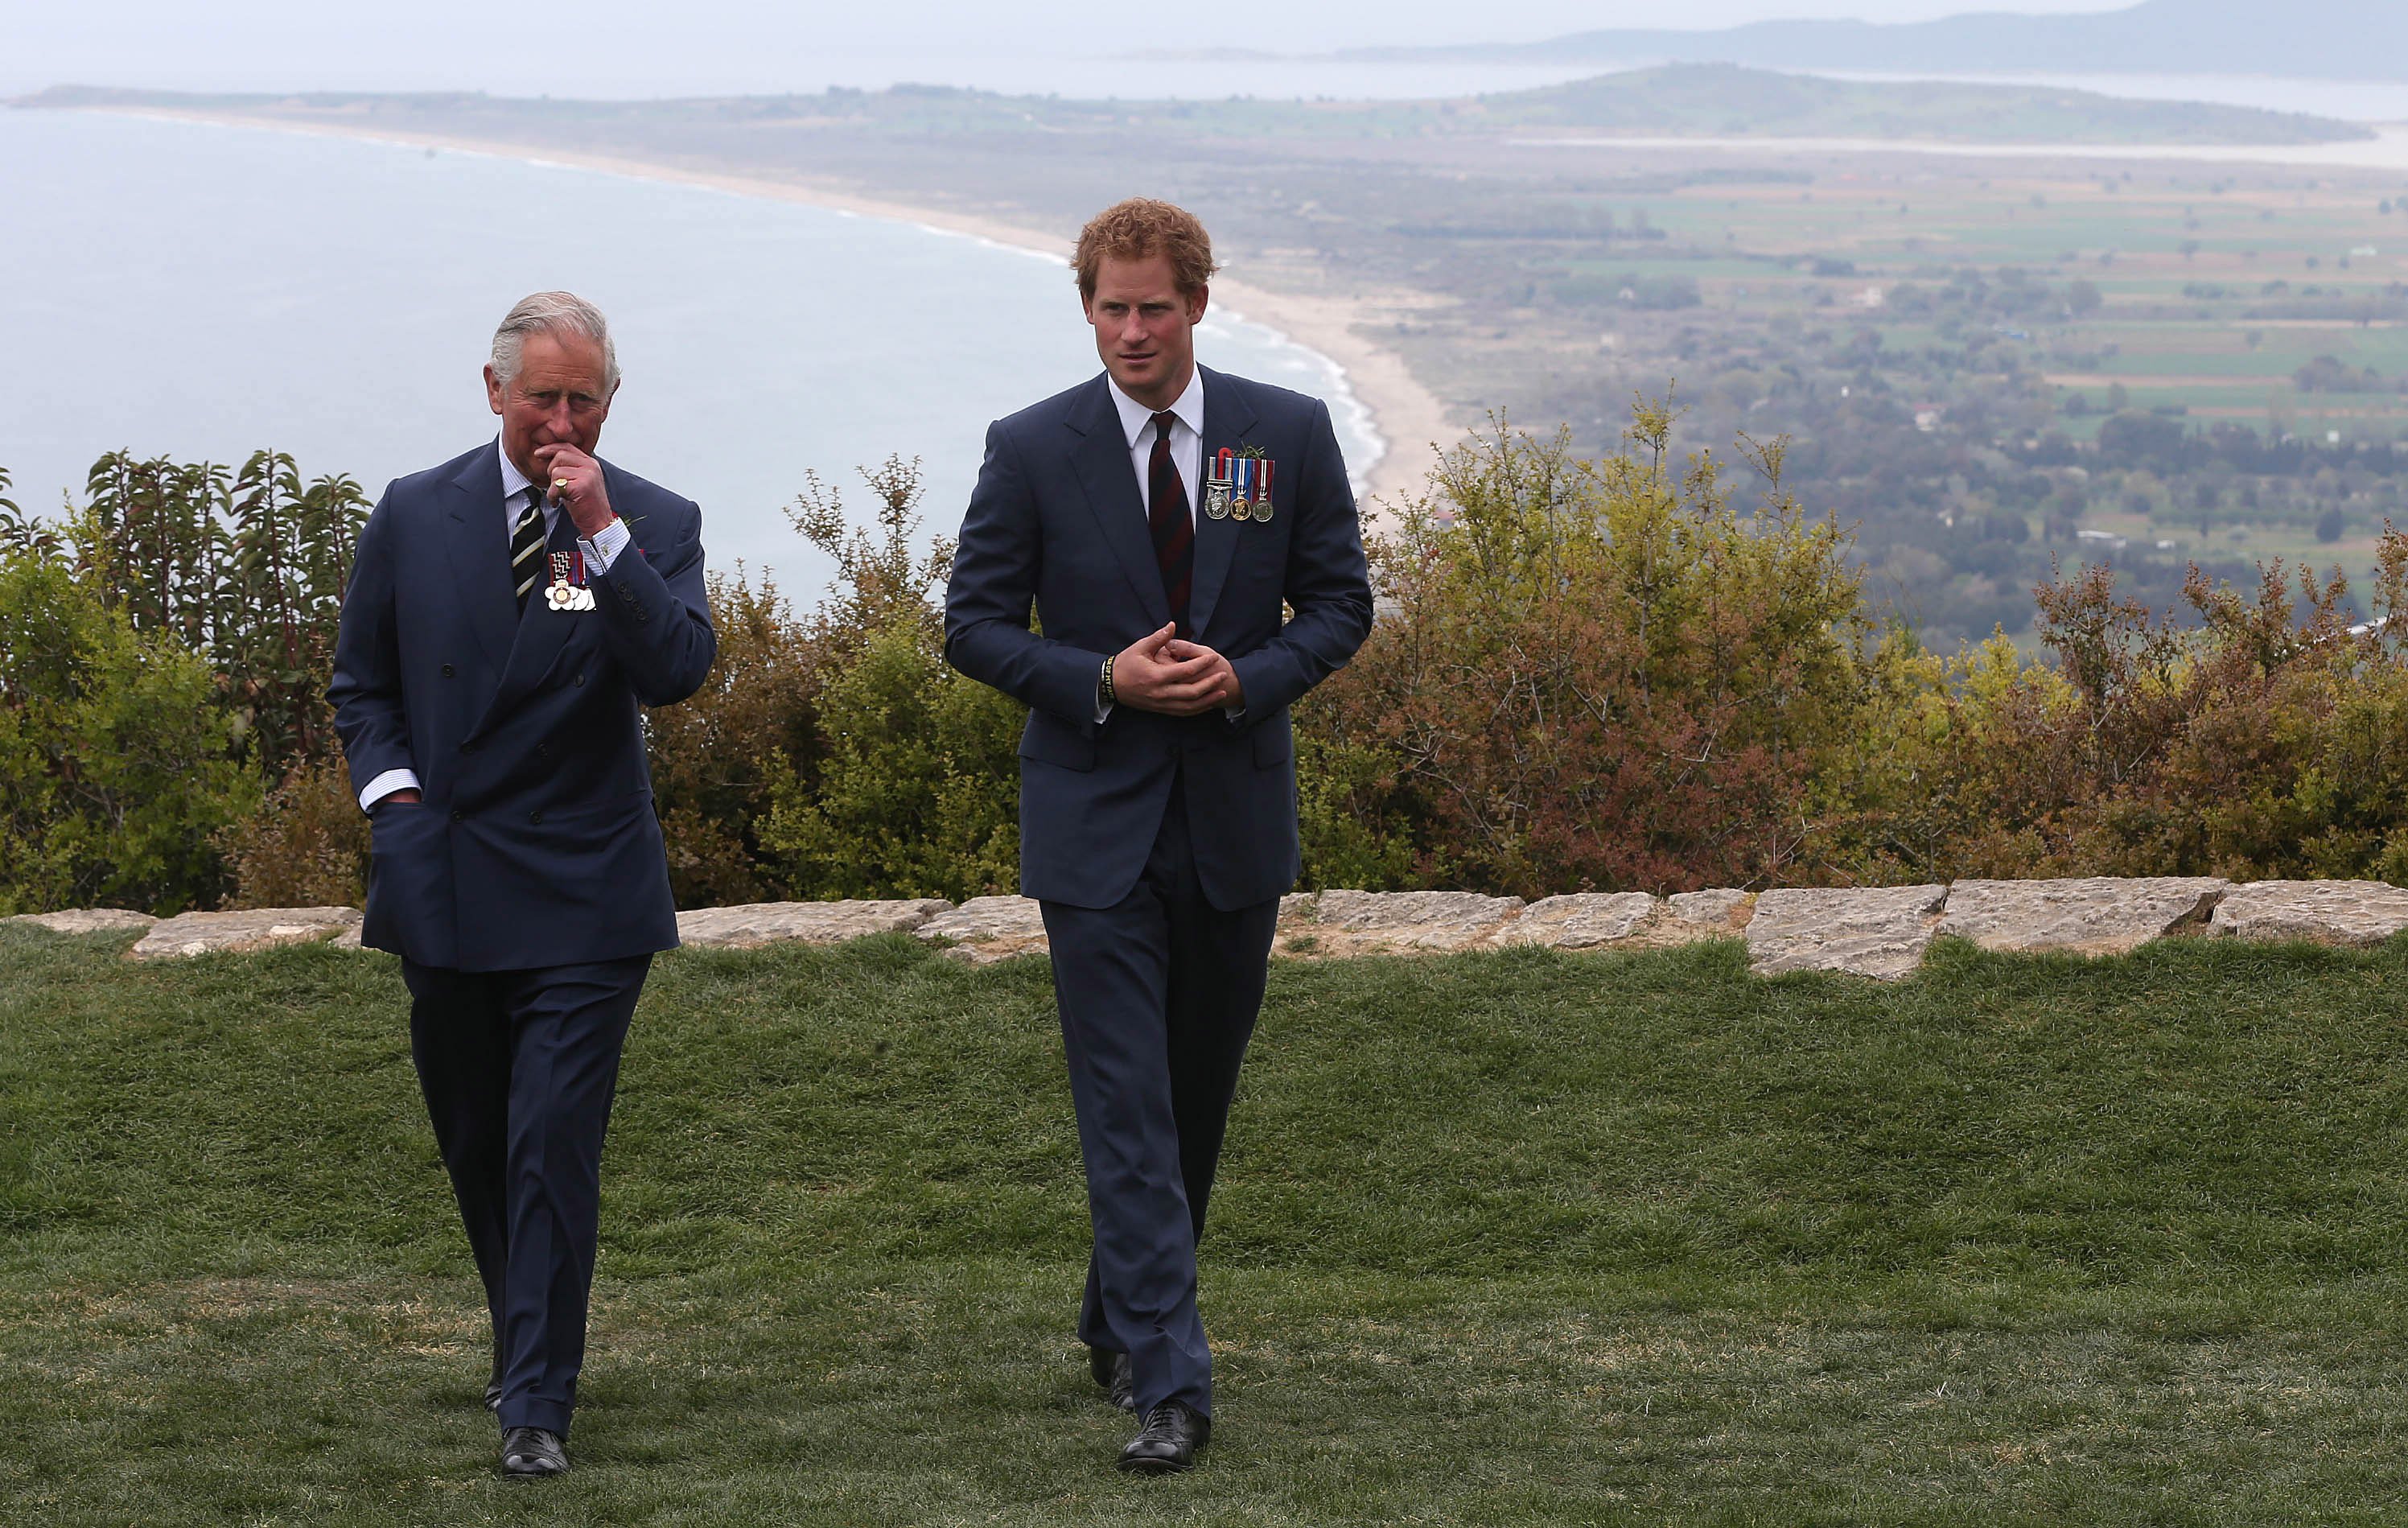 Prince Harry chats with King Charles III during a visit to The Nek, a narrow stretch of ridge in the Anzac battlefield on the Gallipoli Peninsula, as part of commemorations marking the 100th anniversary of the Battle of Gallipoli on April 25, 2015, in Gallipoli, Turkey. | Source: Getty Images